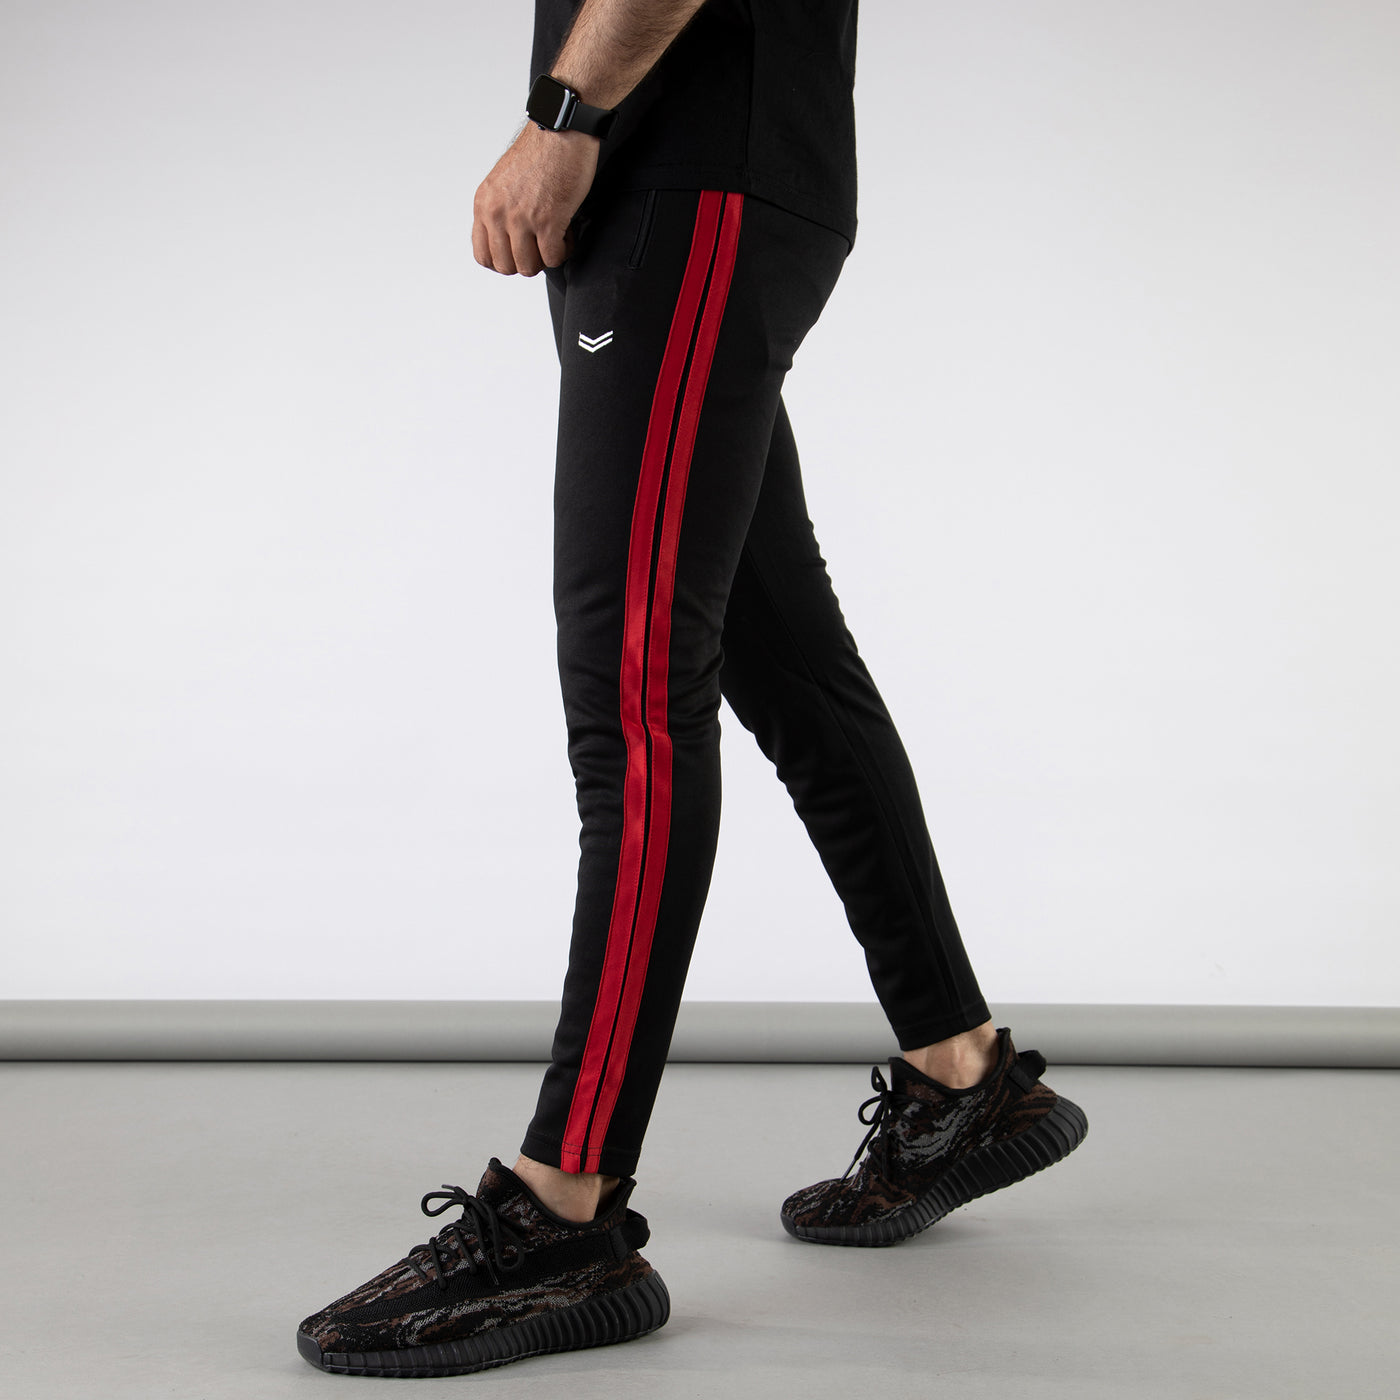 Black Quick Dry Bottoms with Two Narrow Red Stripes